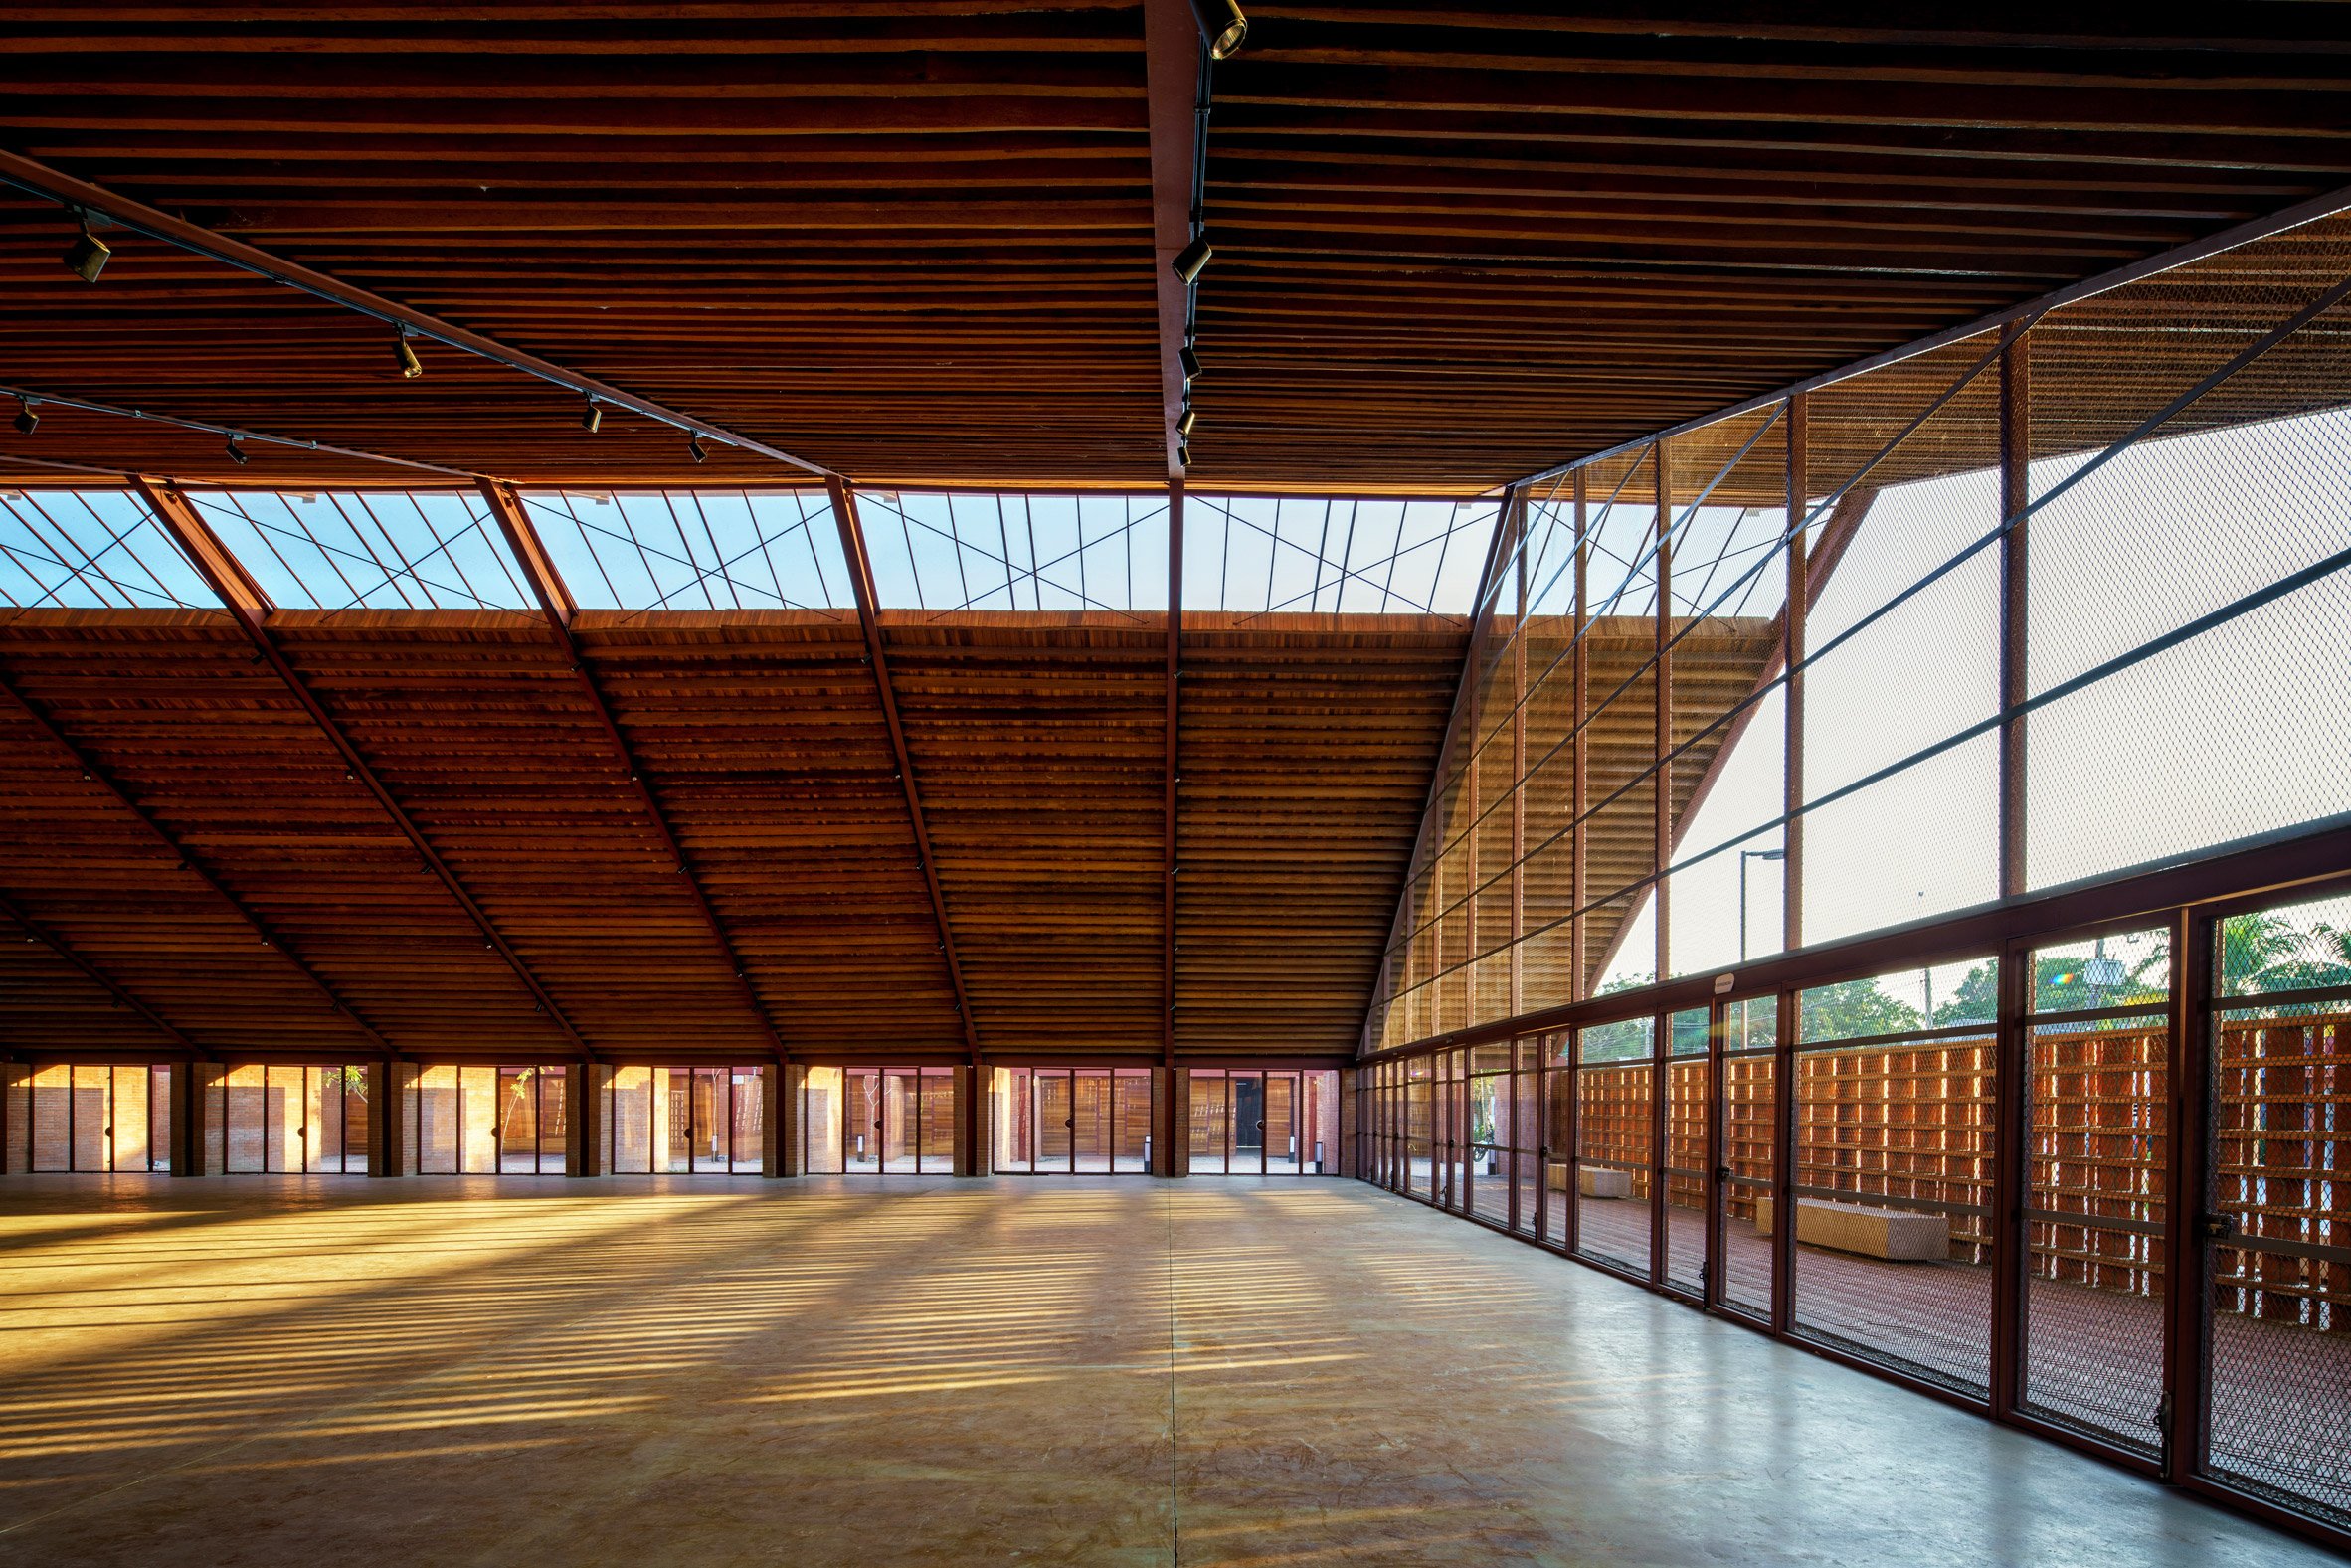 An expansive interior space with a large pitched timber roof and glazed gable end